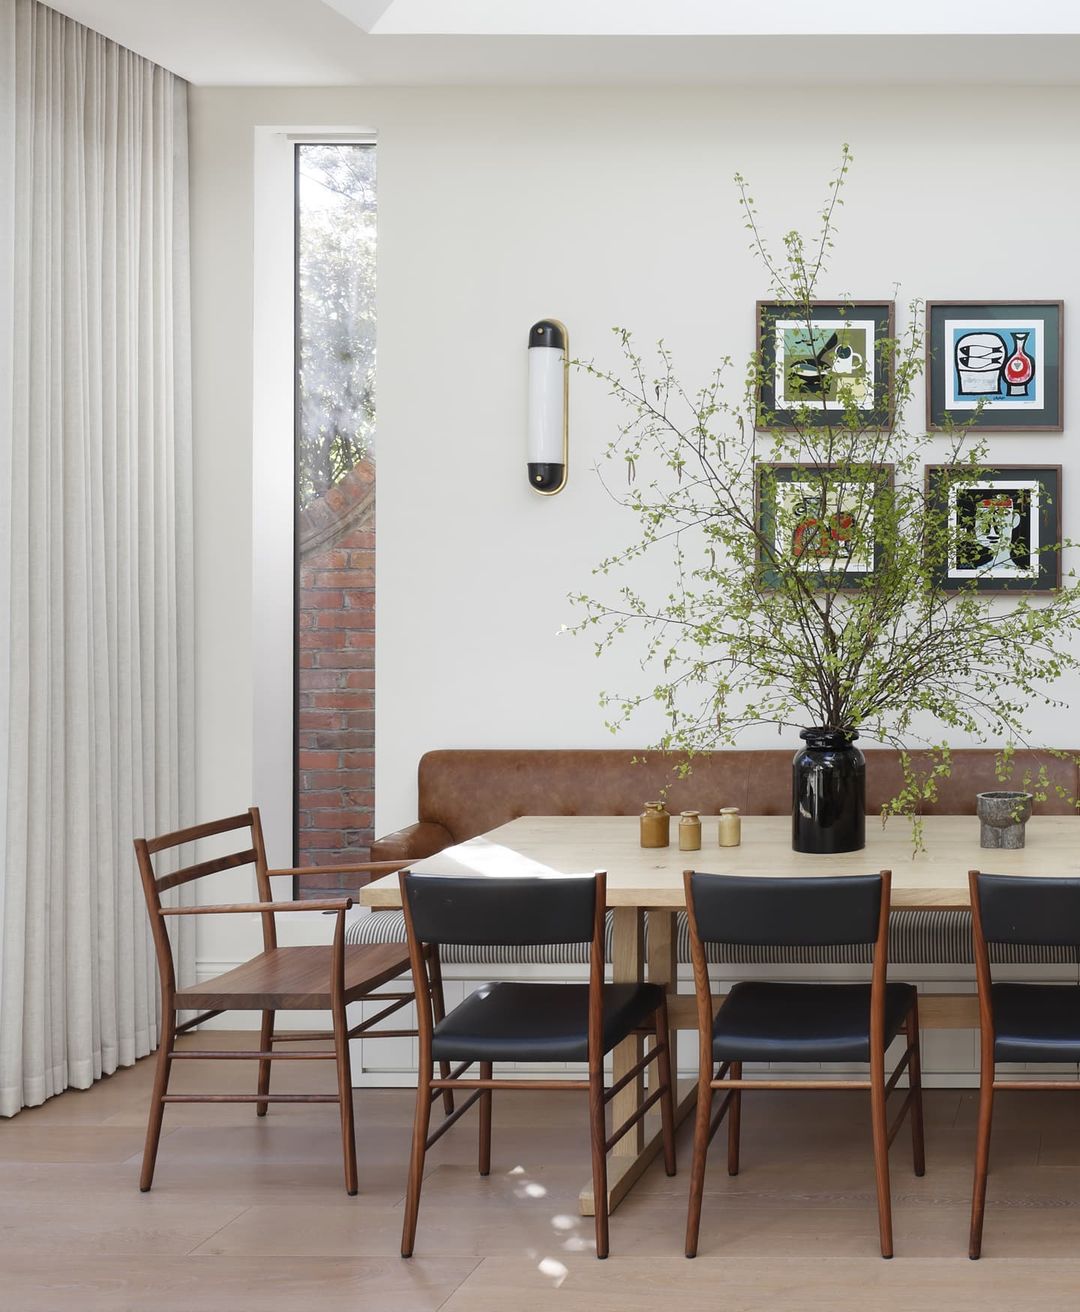 8 Ways to Create an Instagram-Worthy Dining Room